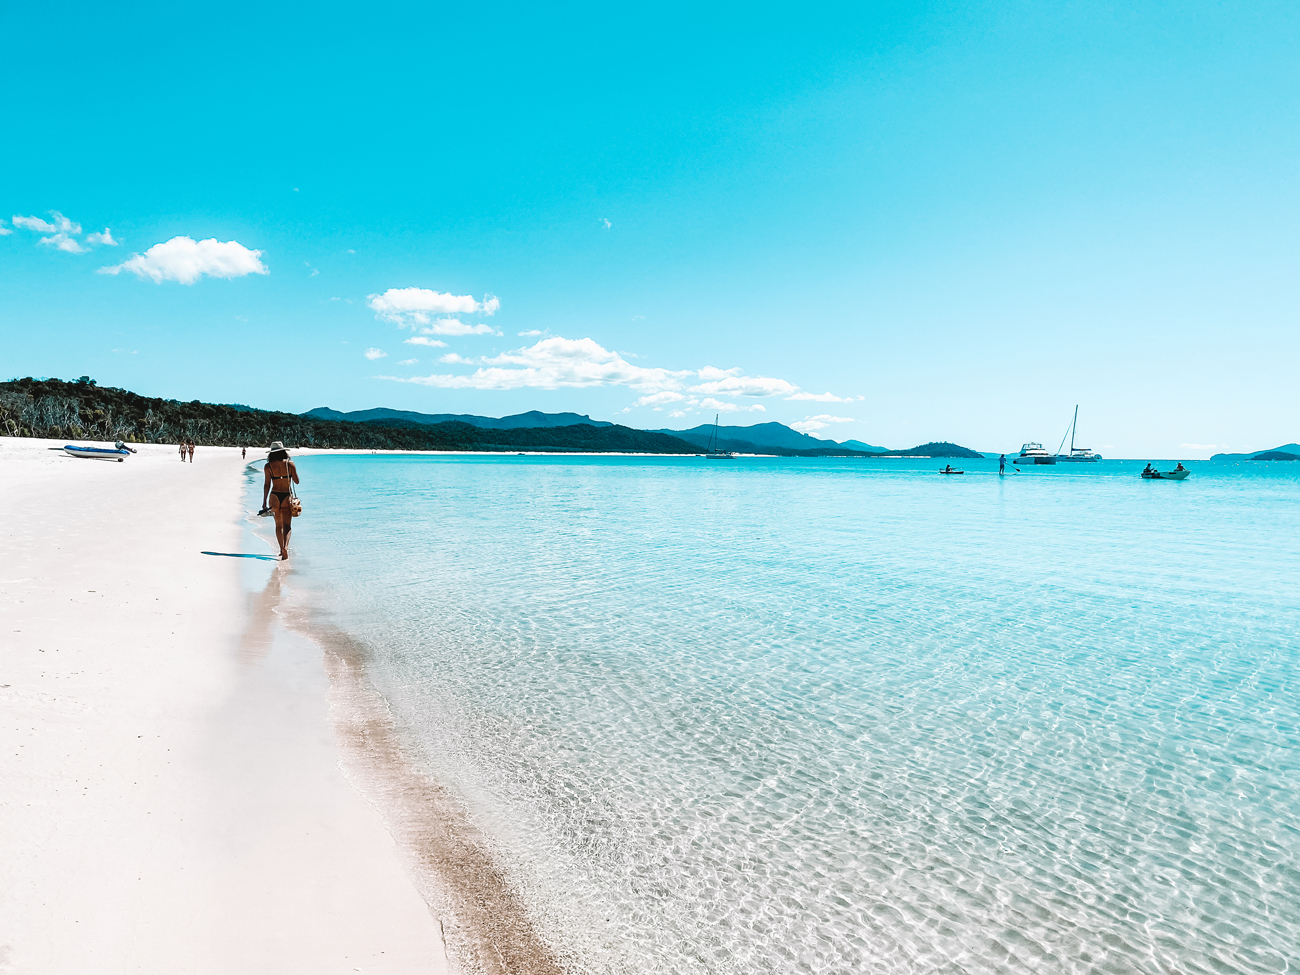 Spring into the Whitsundays with WAHI